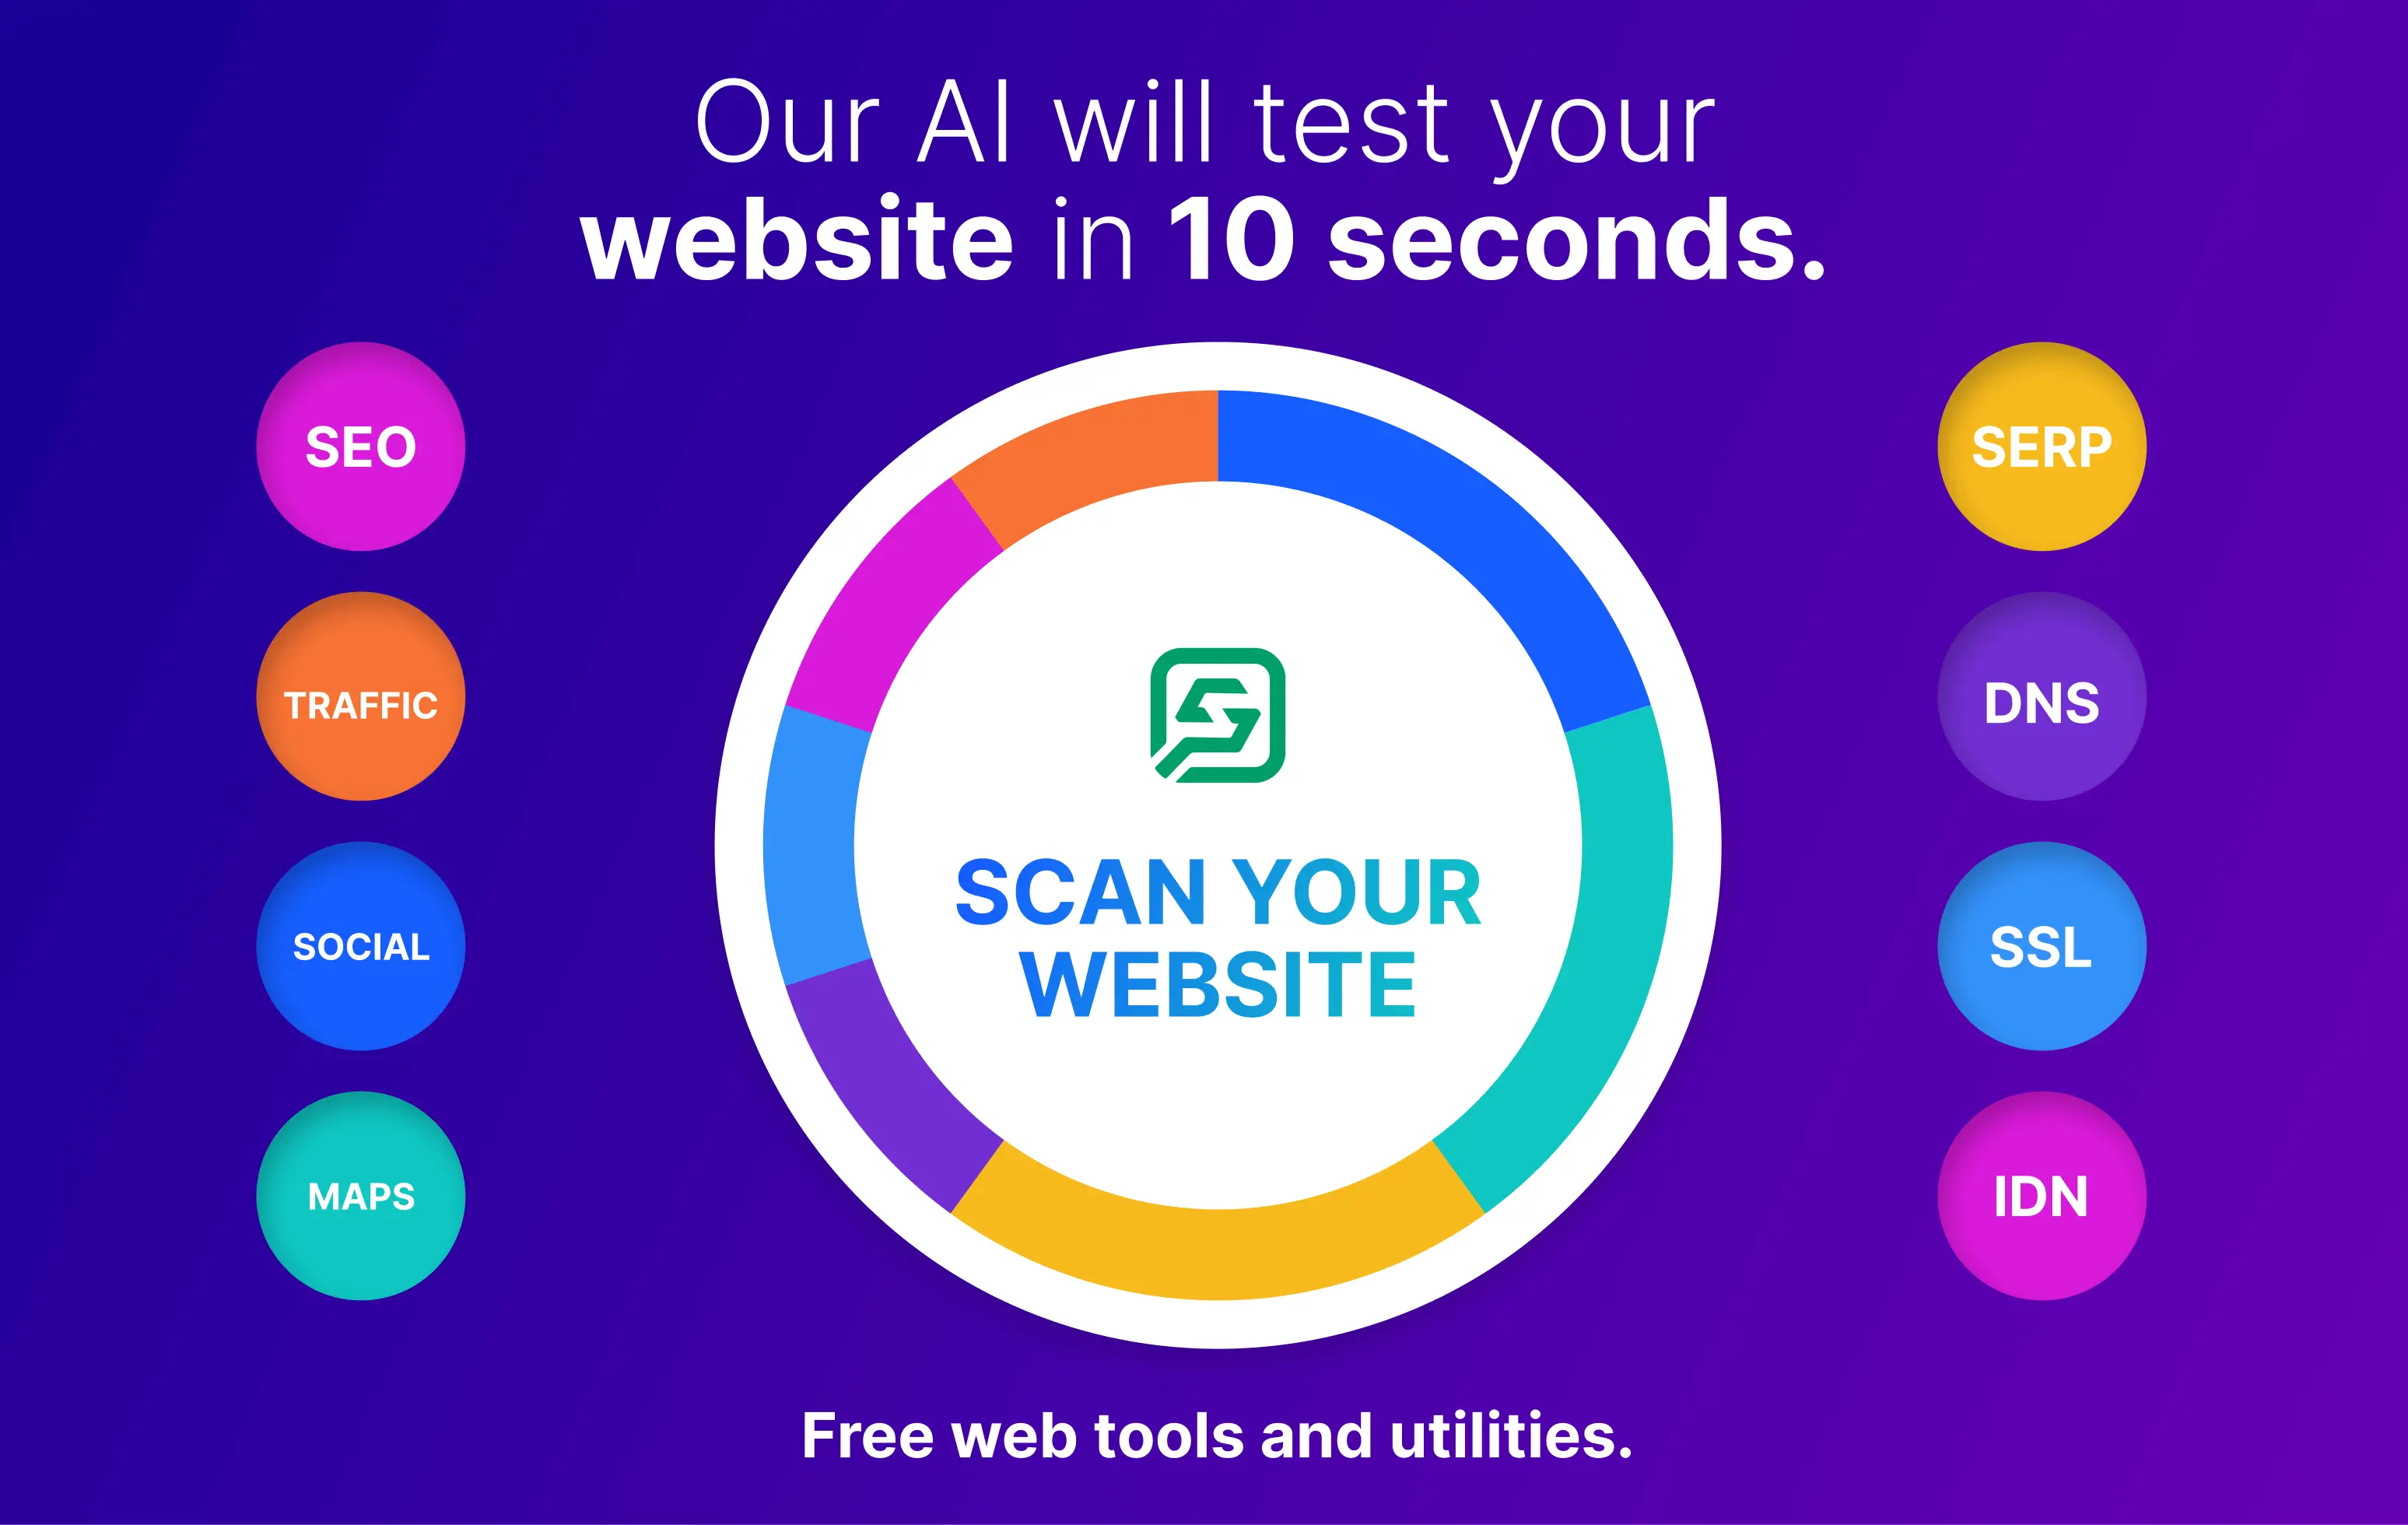 Boost Your Rankings: Check Your SEO Score with Our Powerful Tool - Boost Your Rankings: Check Your SEO Score with Our Powerful Tool, you can see how well your website is optimized for search engines.